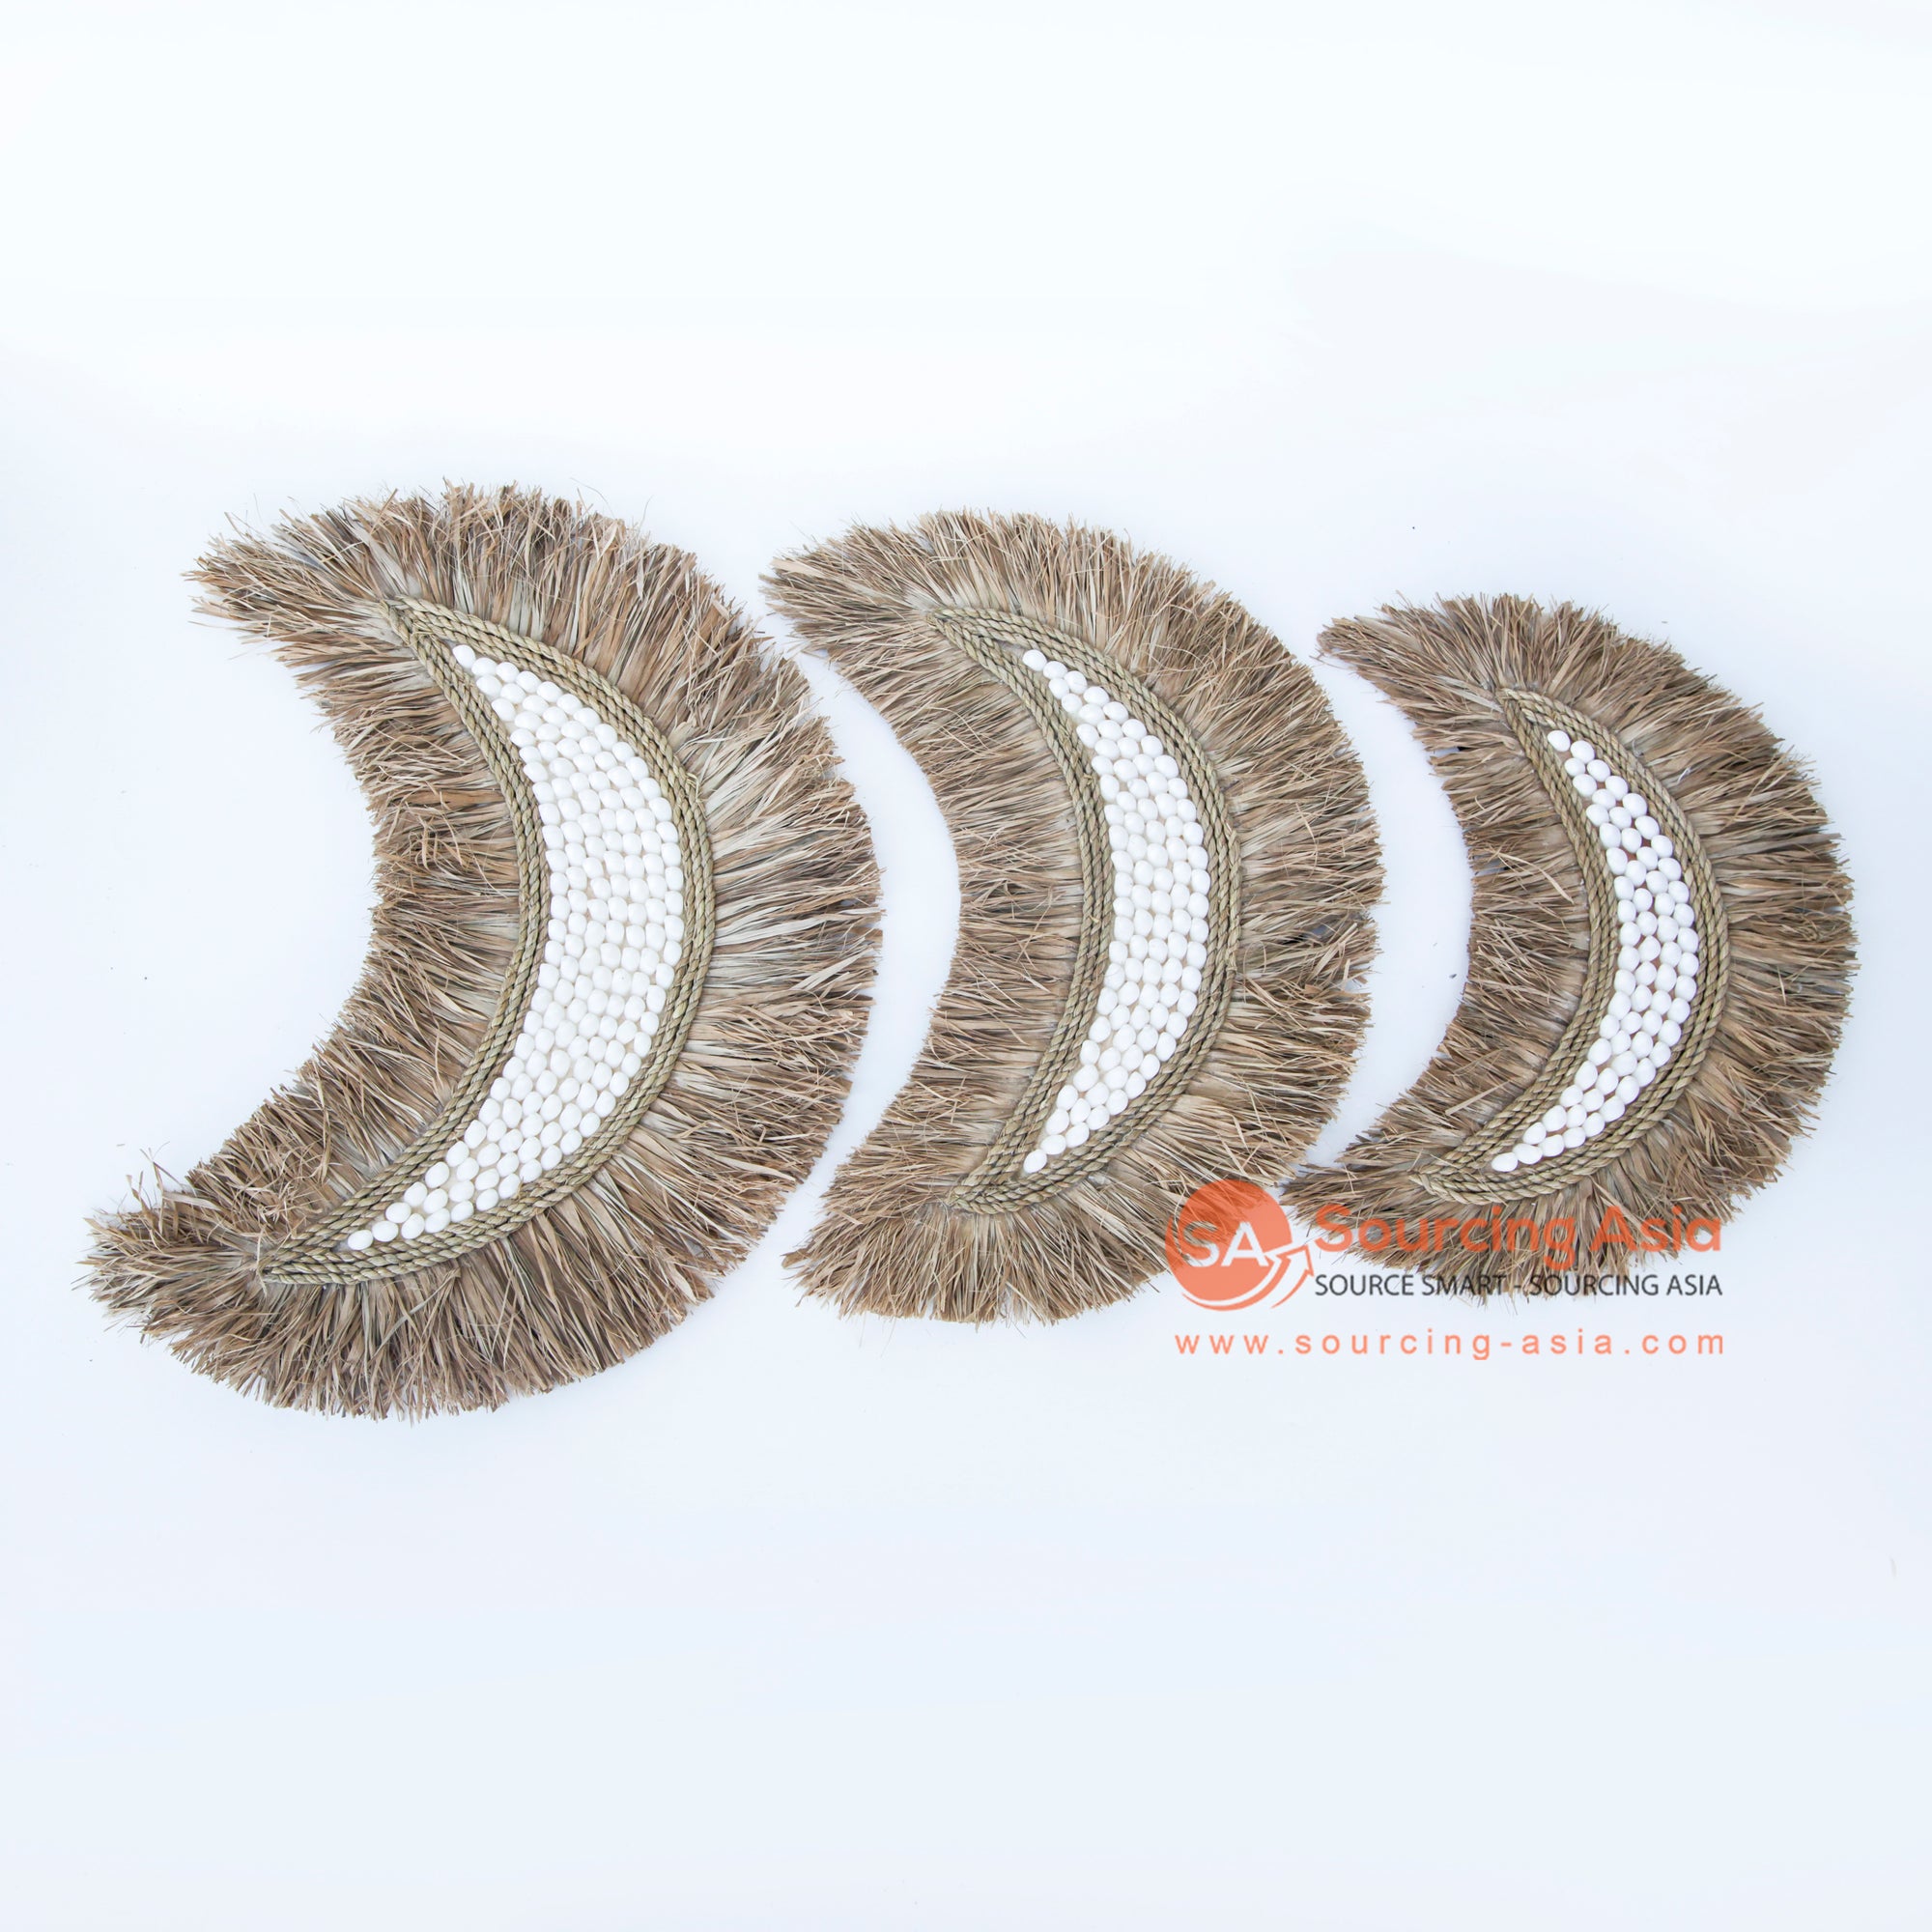 DHL034 SET OF THREE NATURAL DRIED RAFFIA AND WHITE SHELL CRESCENT MOON WALL DECORATIONS